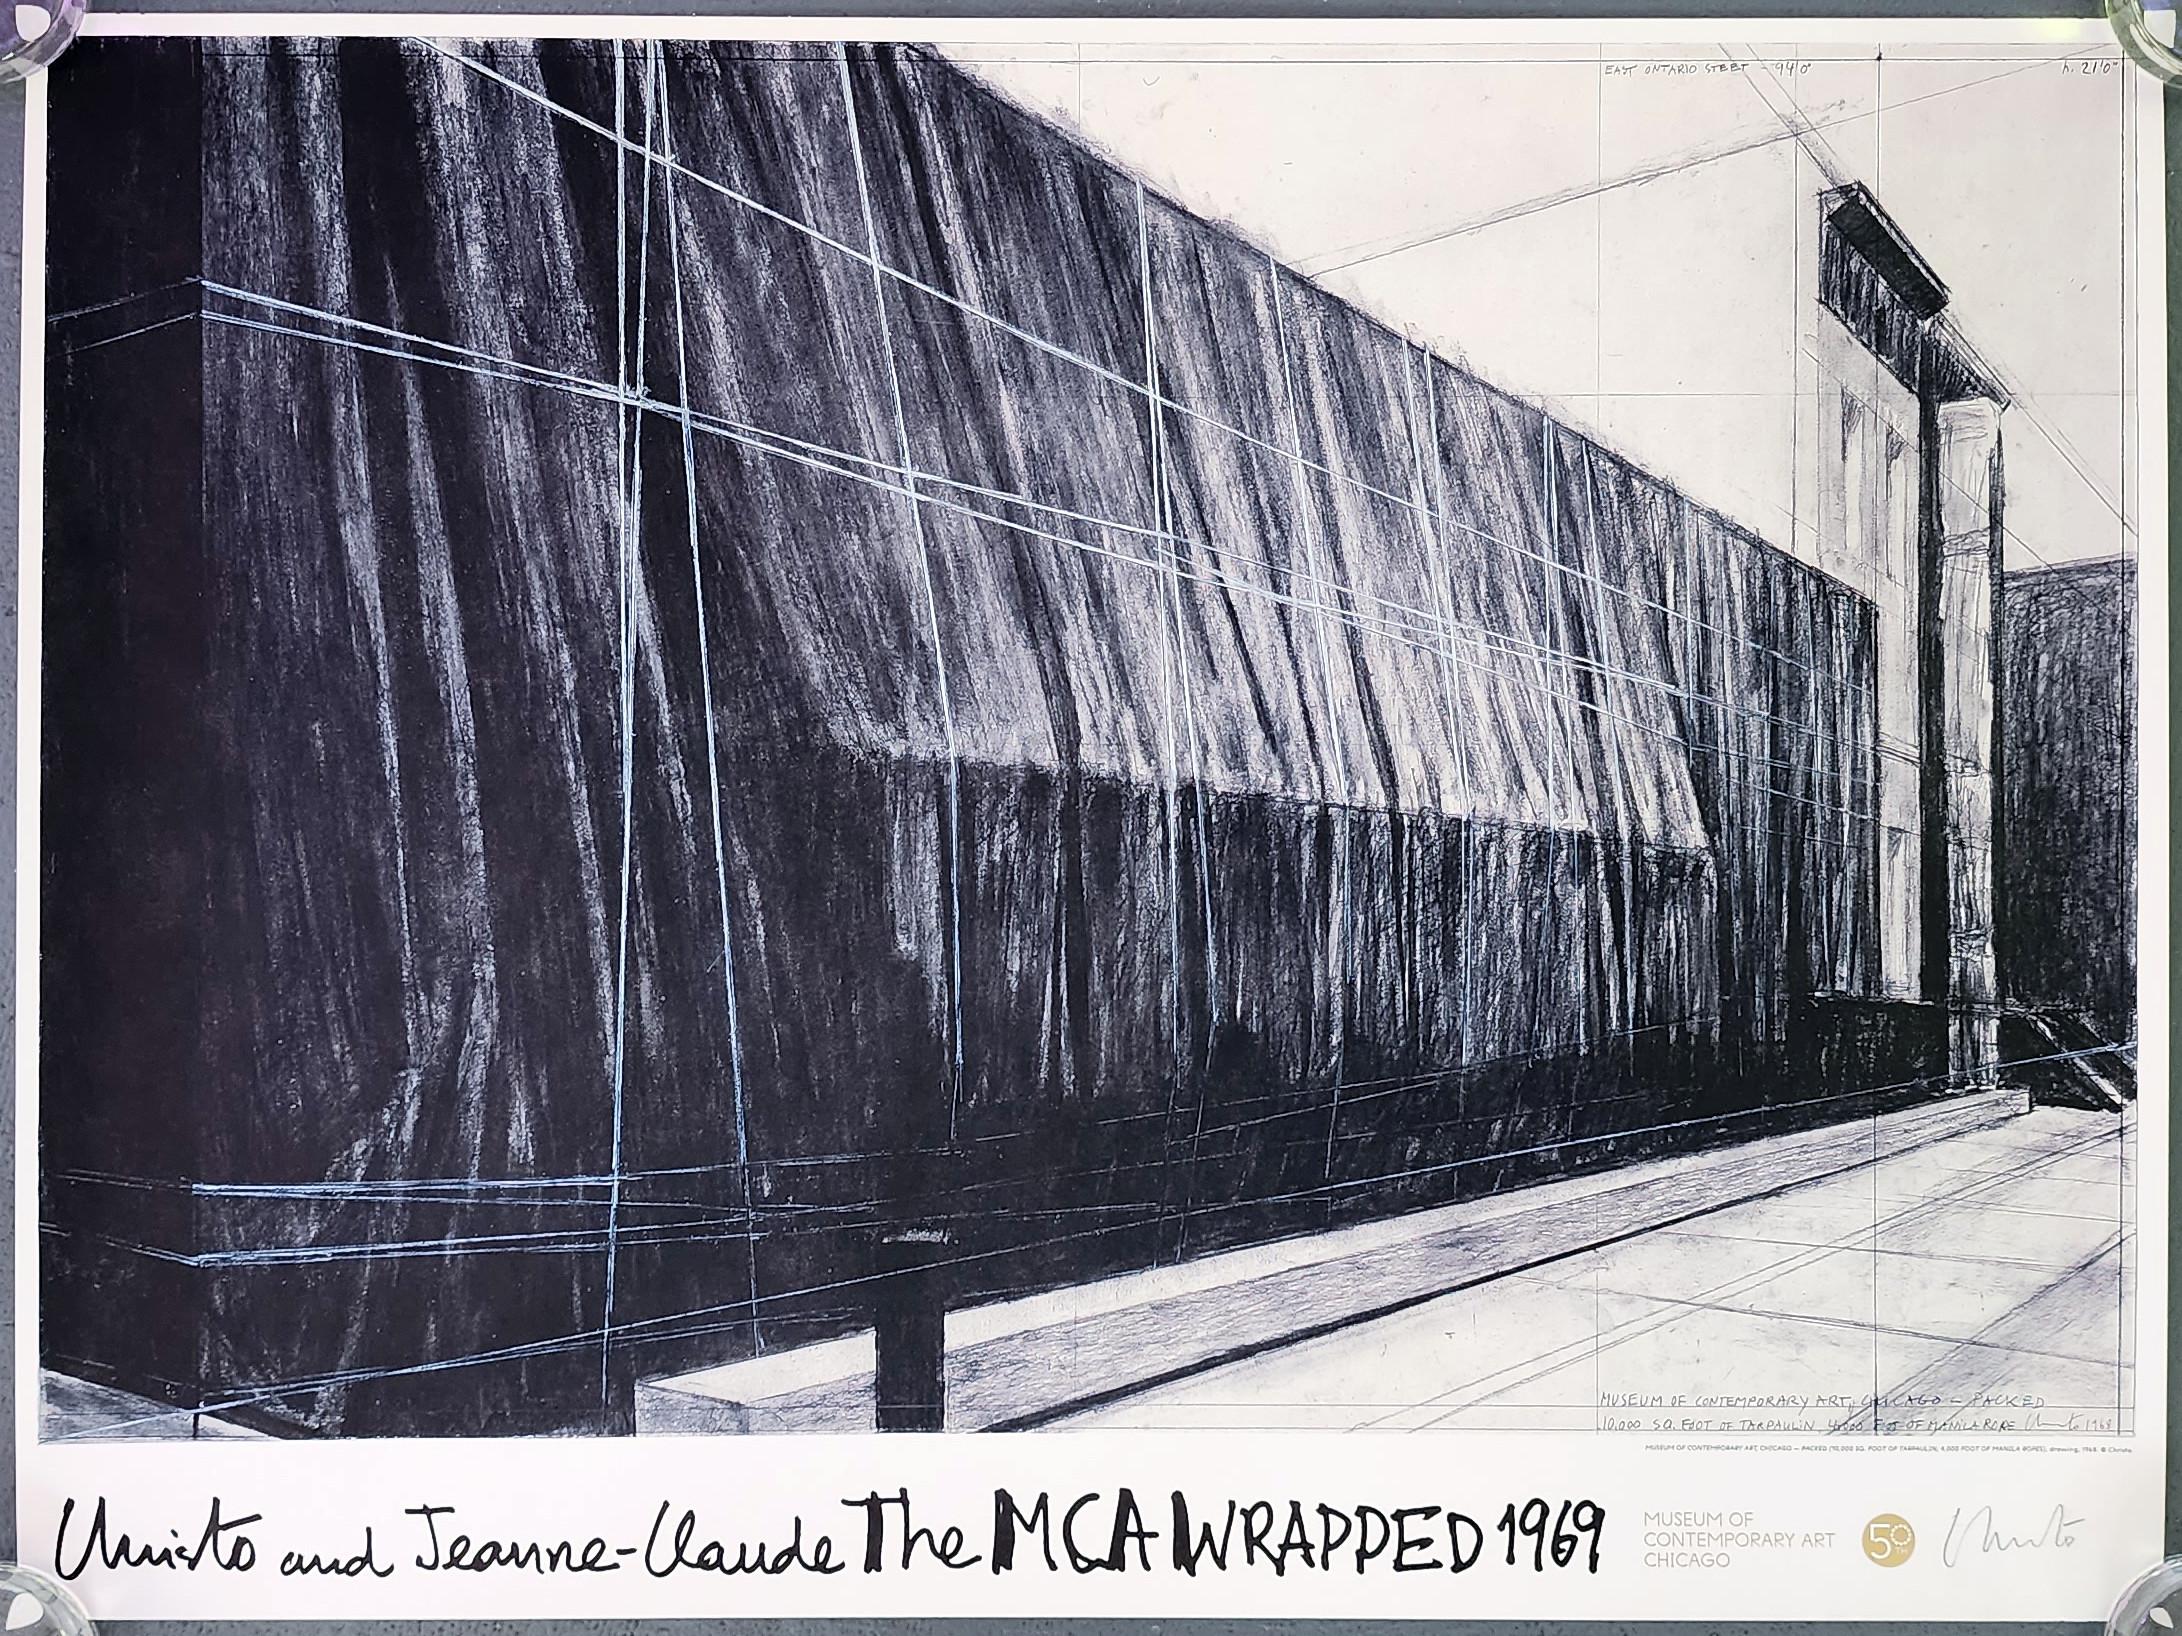 The MCA "Wrapped" 1969 (wrapping art, public installations, conceptual art) - Print by Christo and Jeanne-Claude